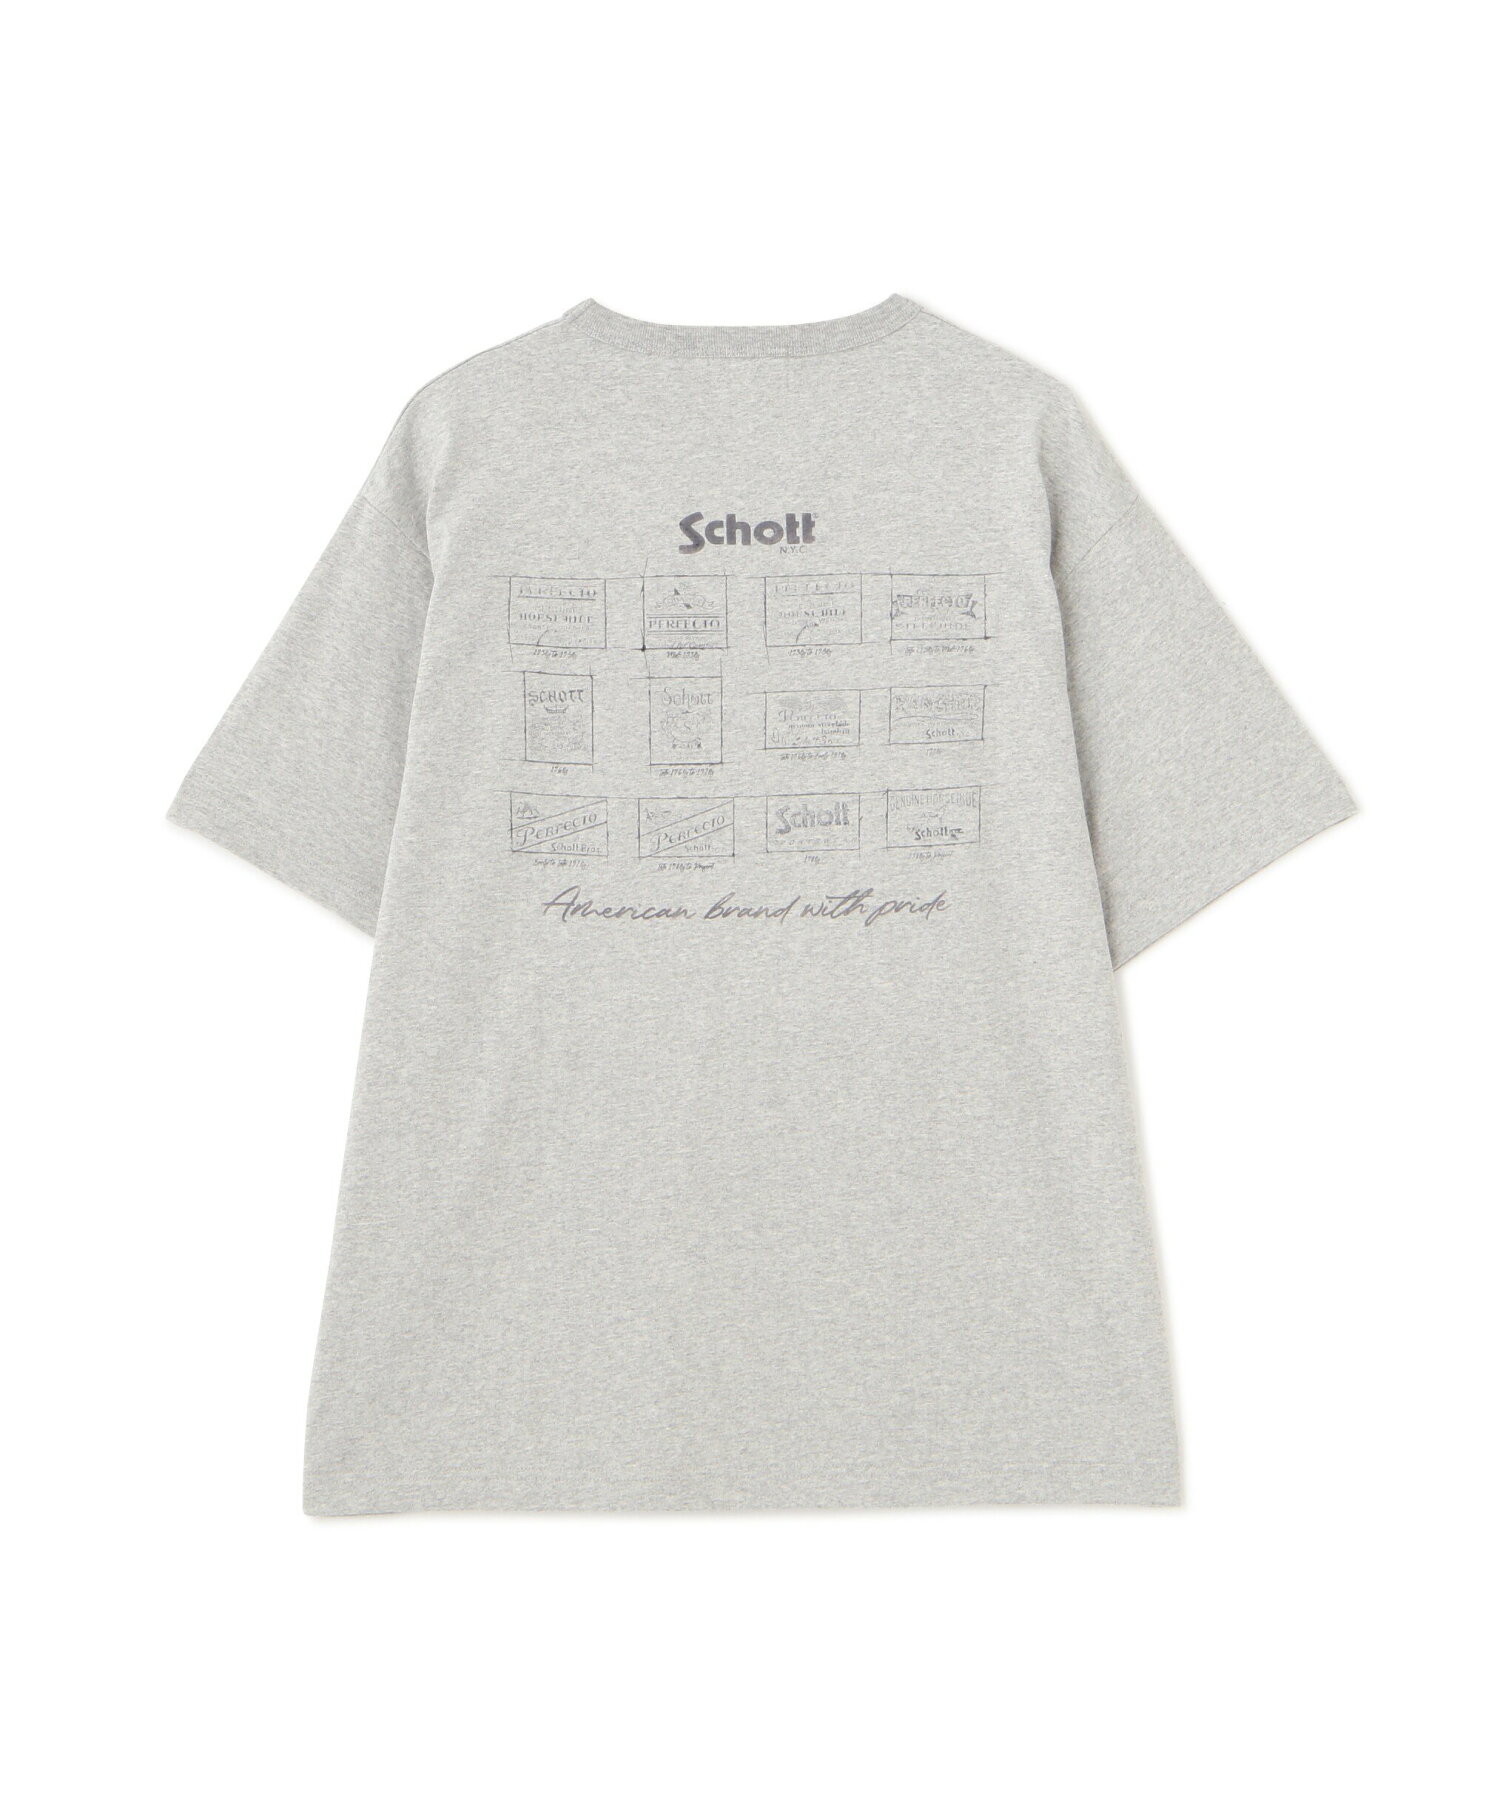 T-SHIRT "ARCHIVE STAMPS"/Tシャツ "アーカイブスタンプ